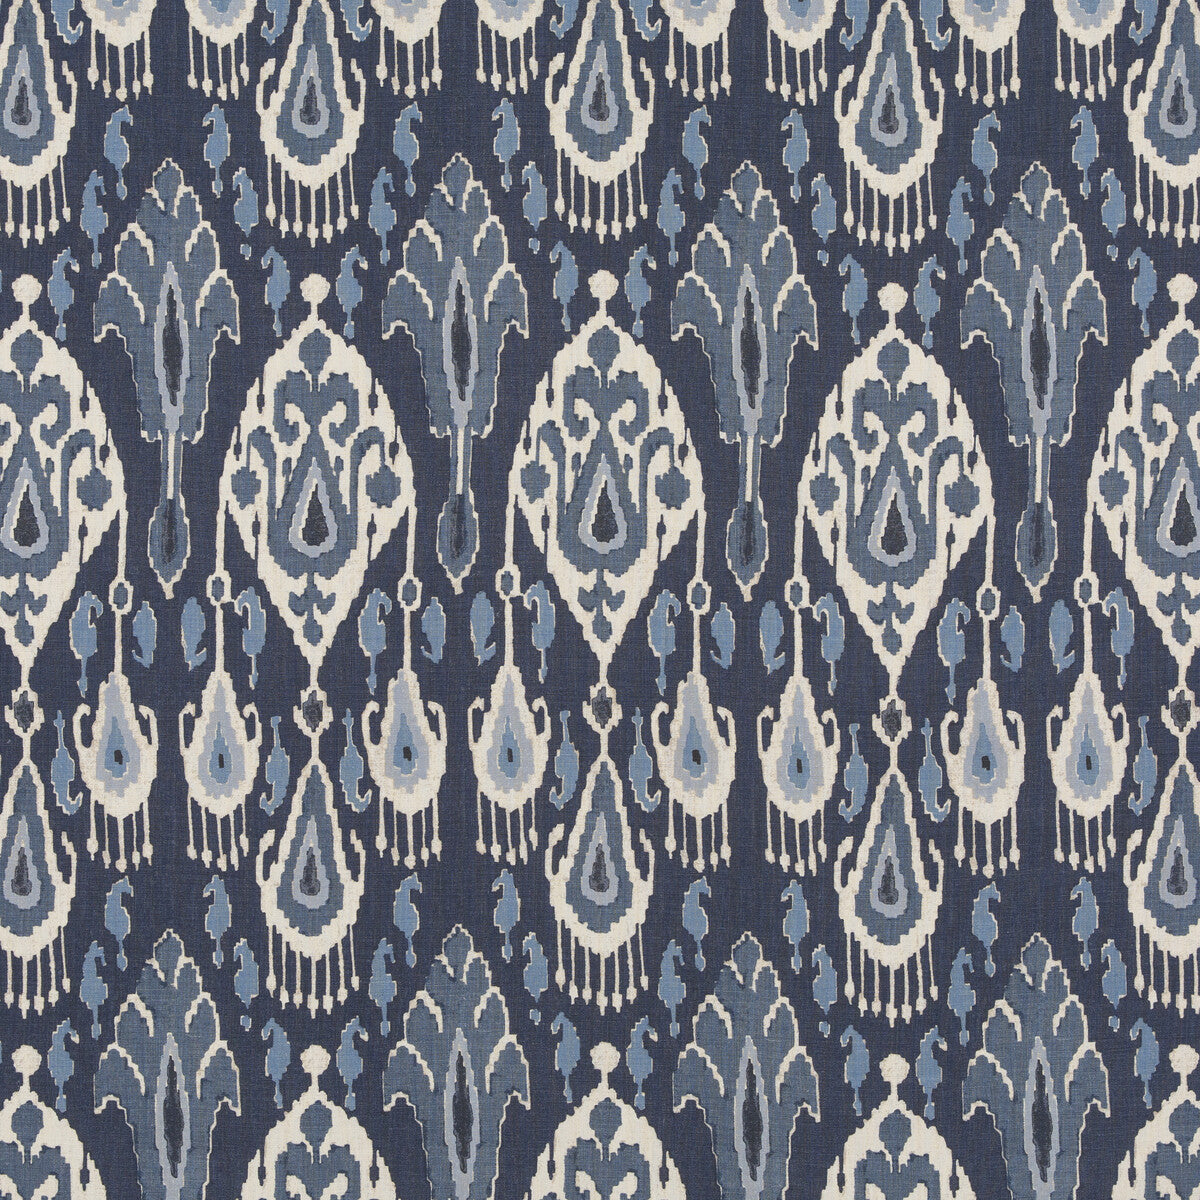 Ikat Bokhara Linen fabric in indigo color - pattern BP10939.1.0 - by G P &amp; J Baker in the Caspian collection